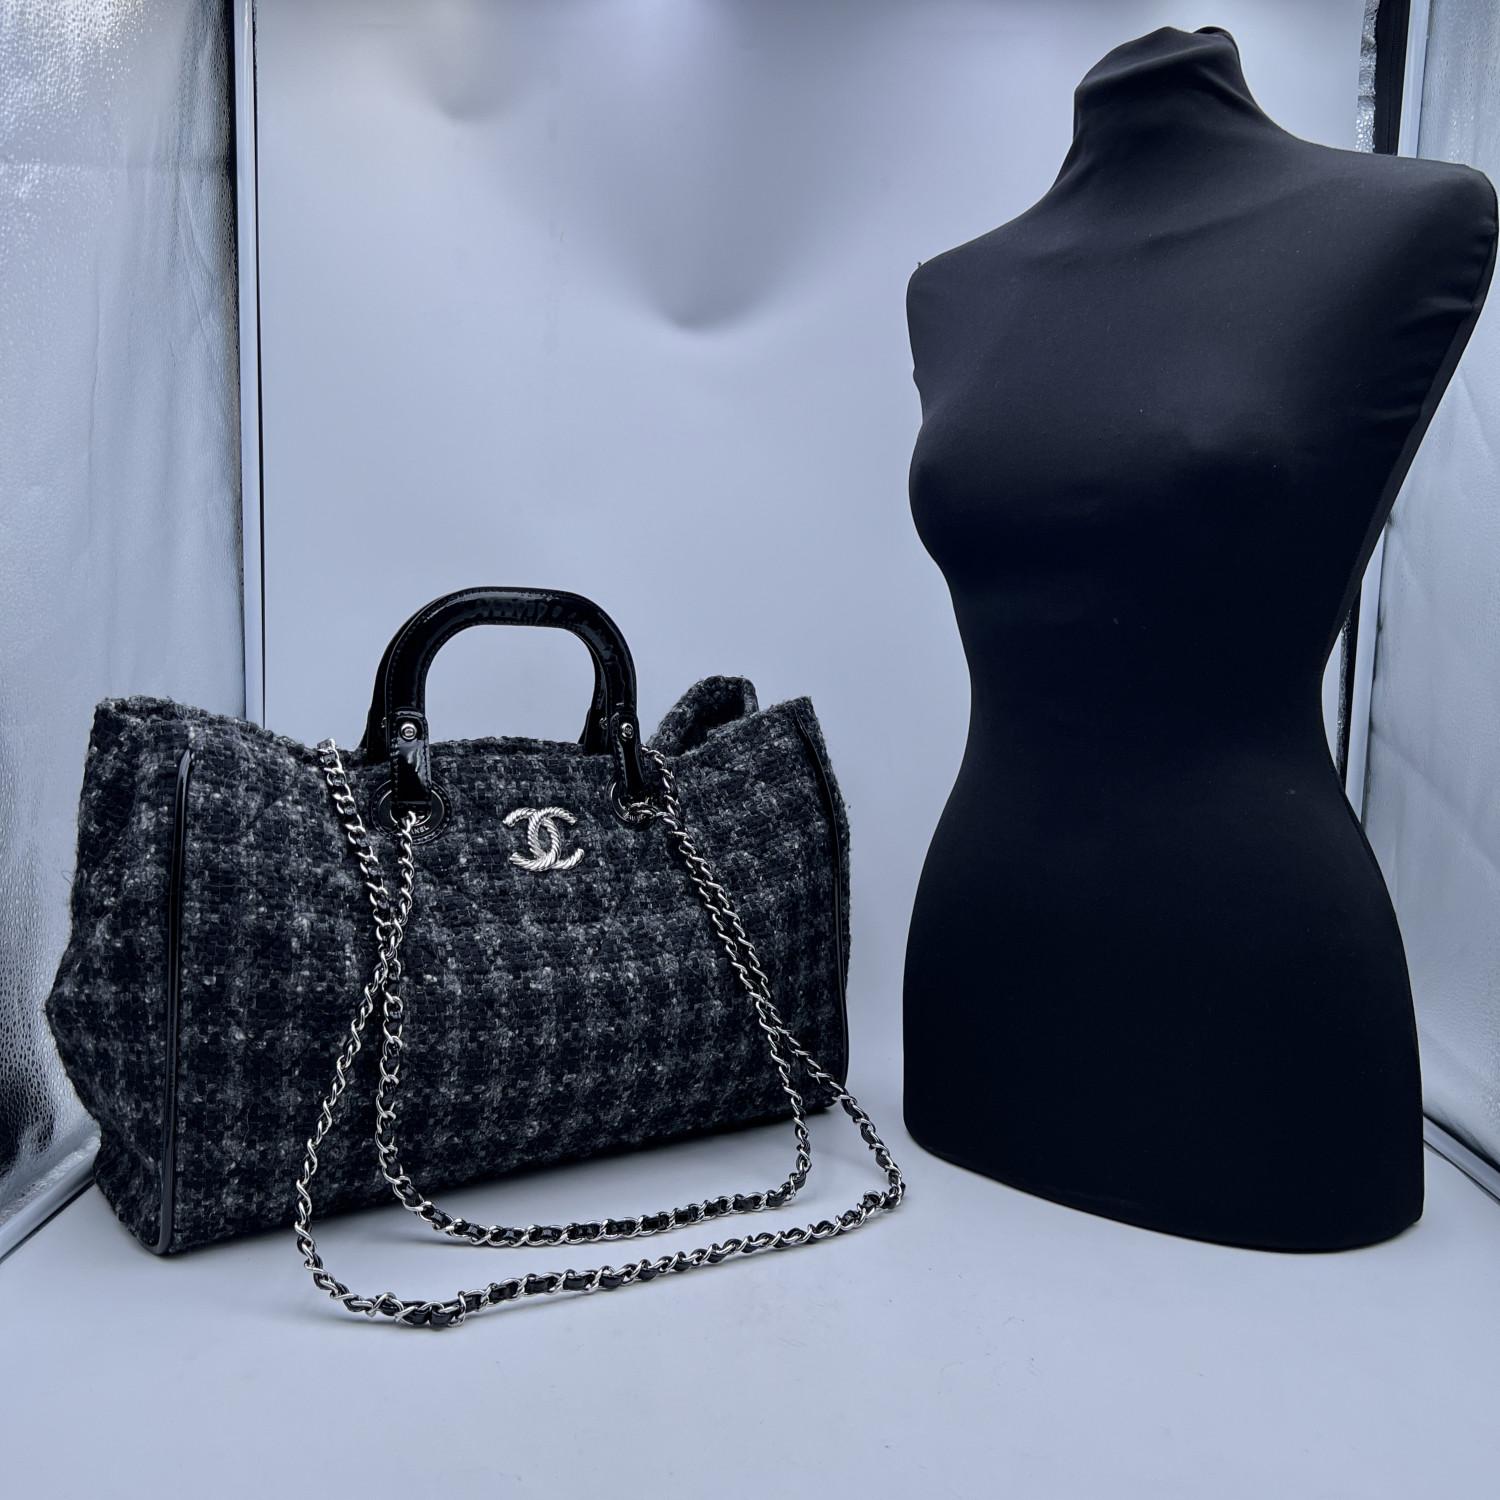 This beautiful Bag will come with a Certificate of Authenticity provided by Entrupy. The certificate will be provided at no further cost

Beautiful Chanel tote, crafted in grey tweed fabric. Period/Era: 2009-2010. Grey tweed with black patent